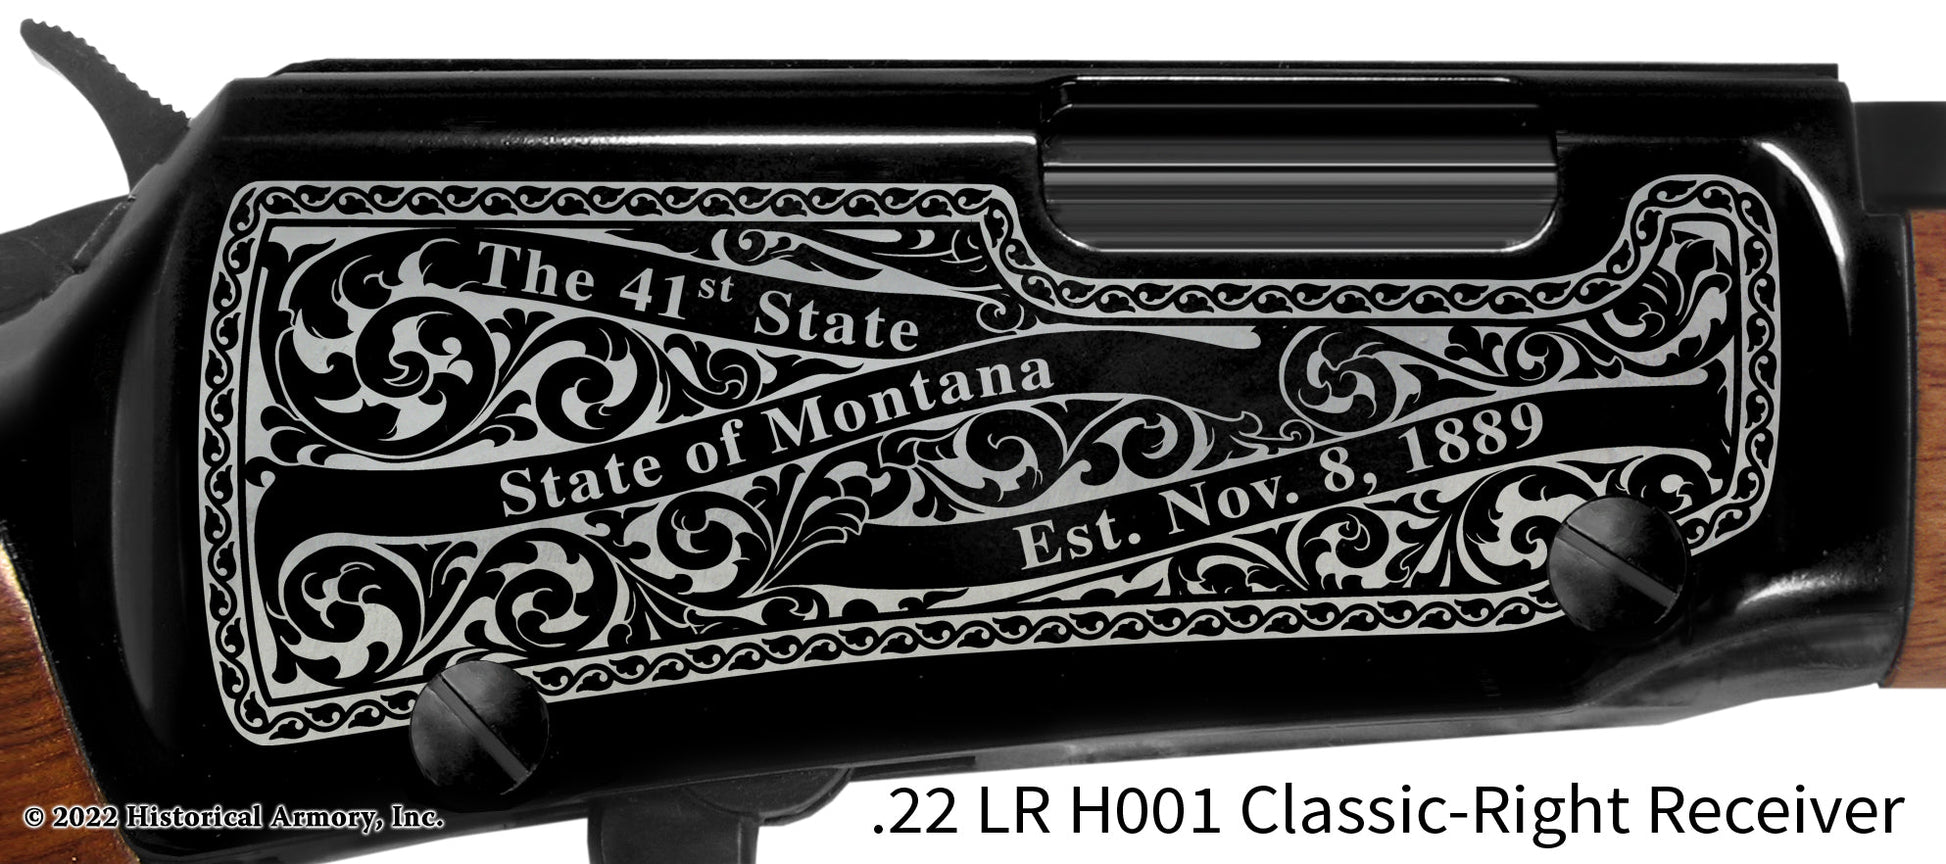 Powell County Montana Engraved Henry H001 Rifle